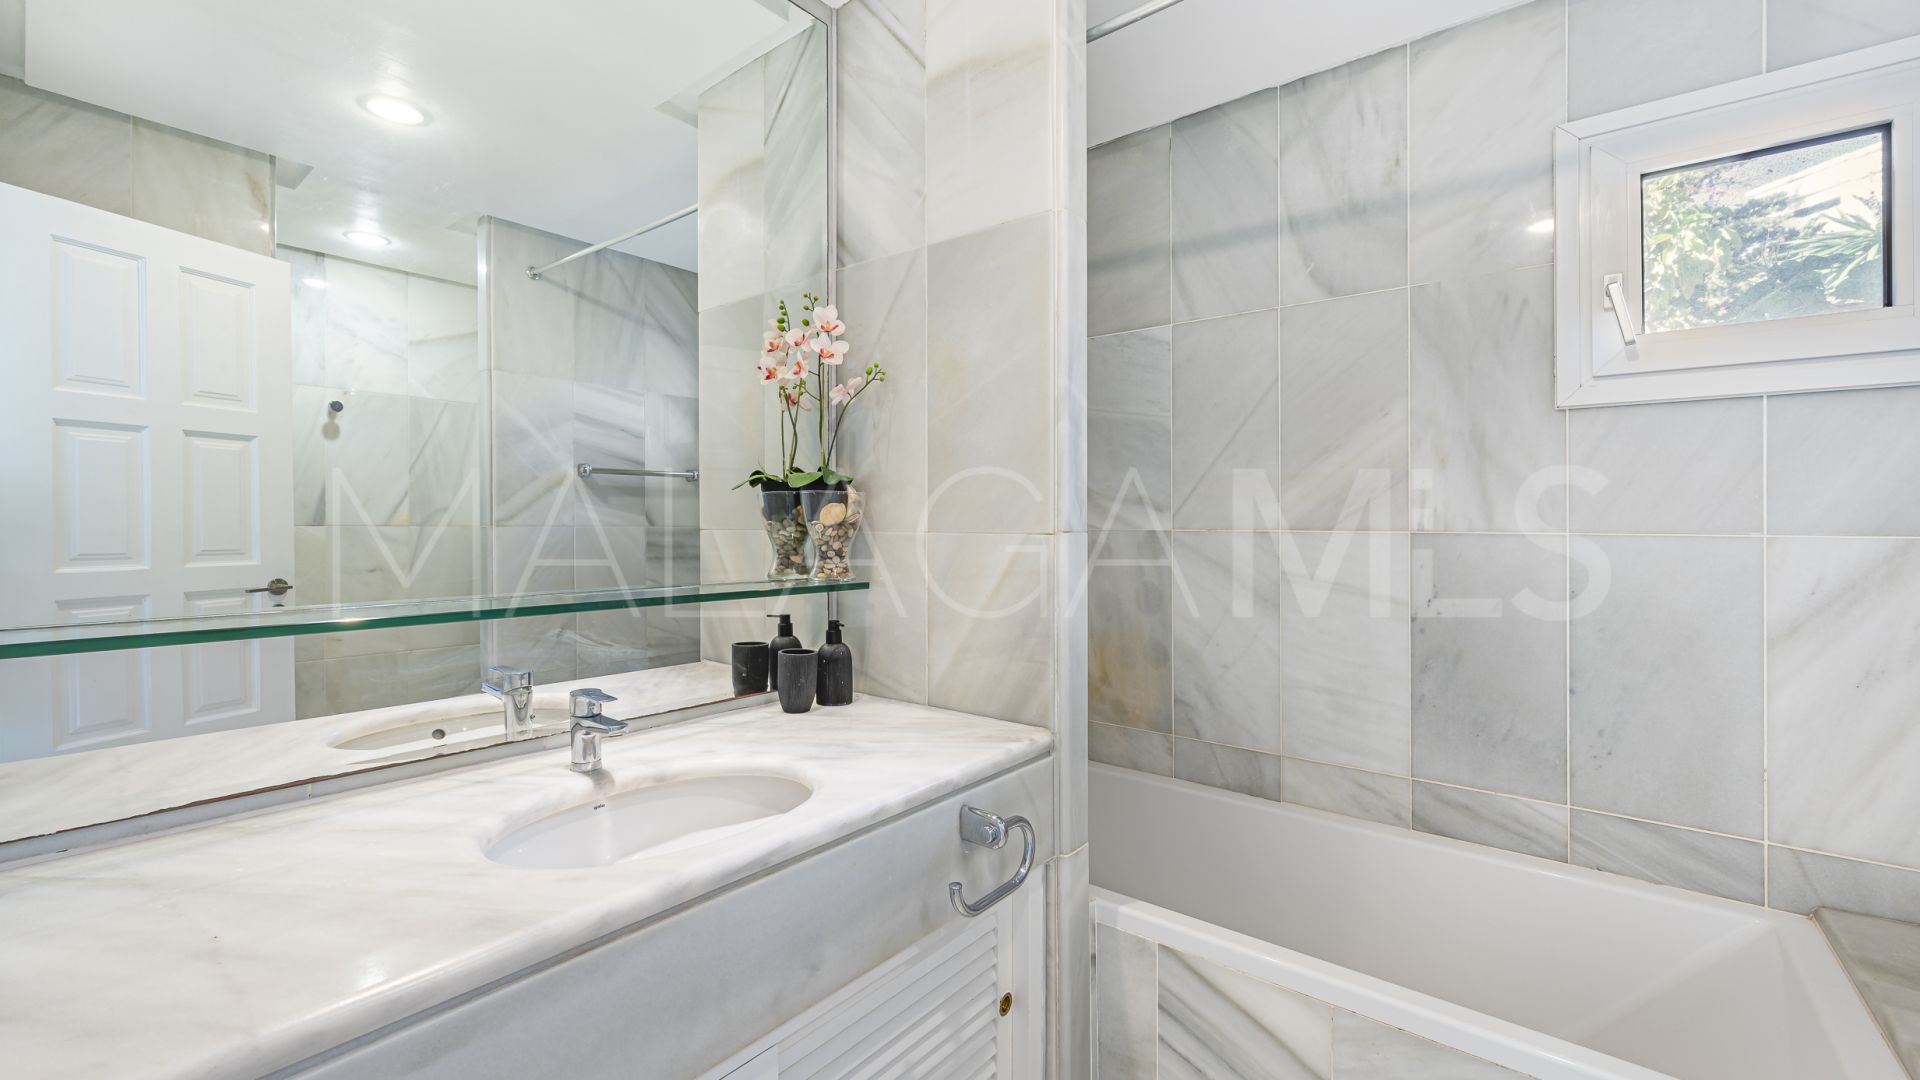 2 bedrooms ground floor apartment for sale in Alhambra del Mar